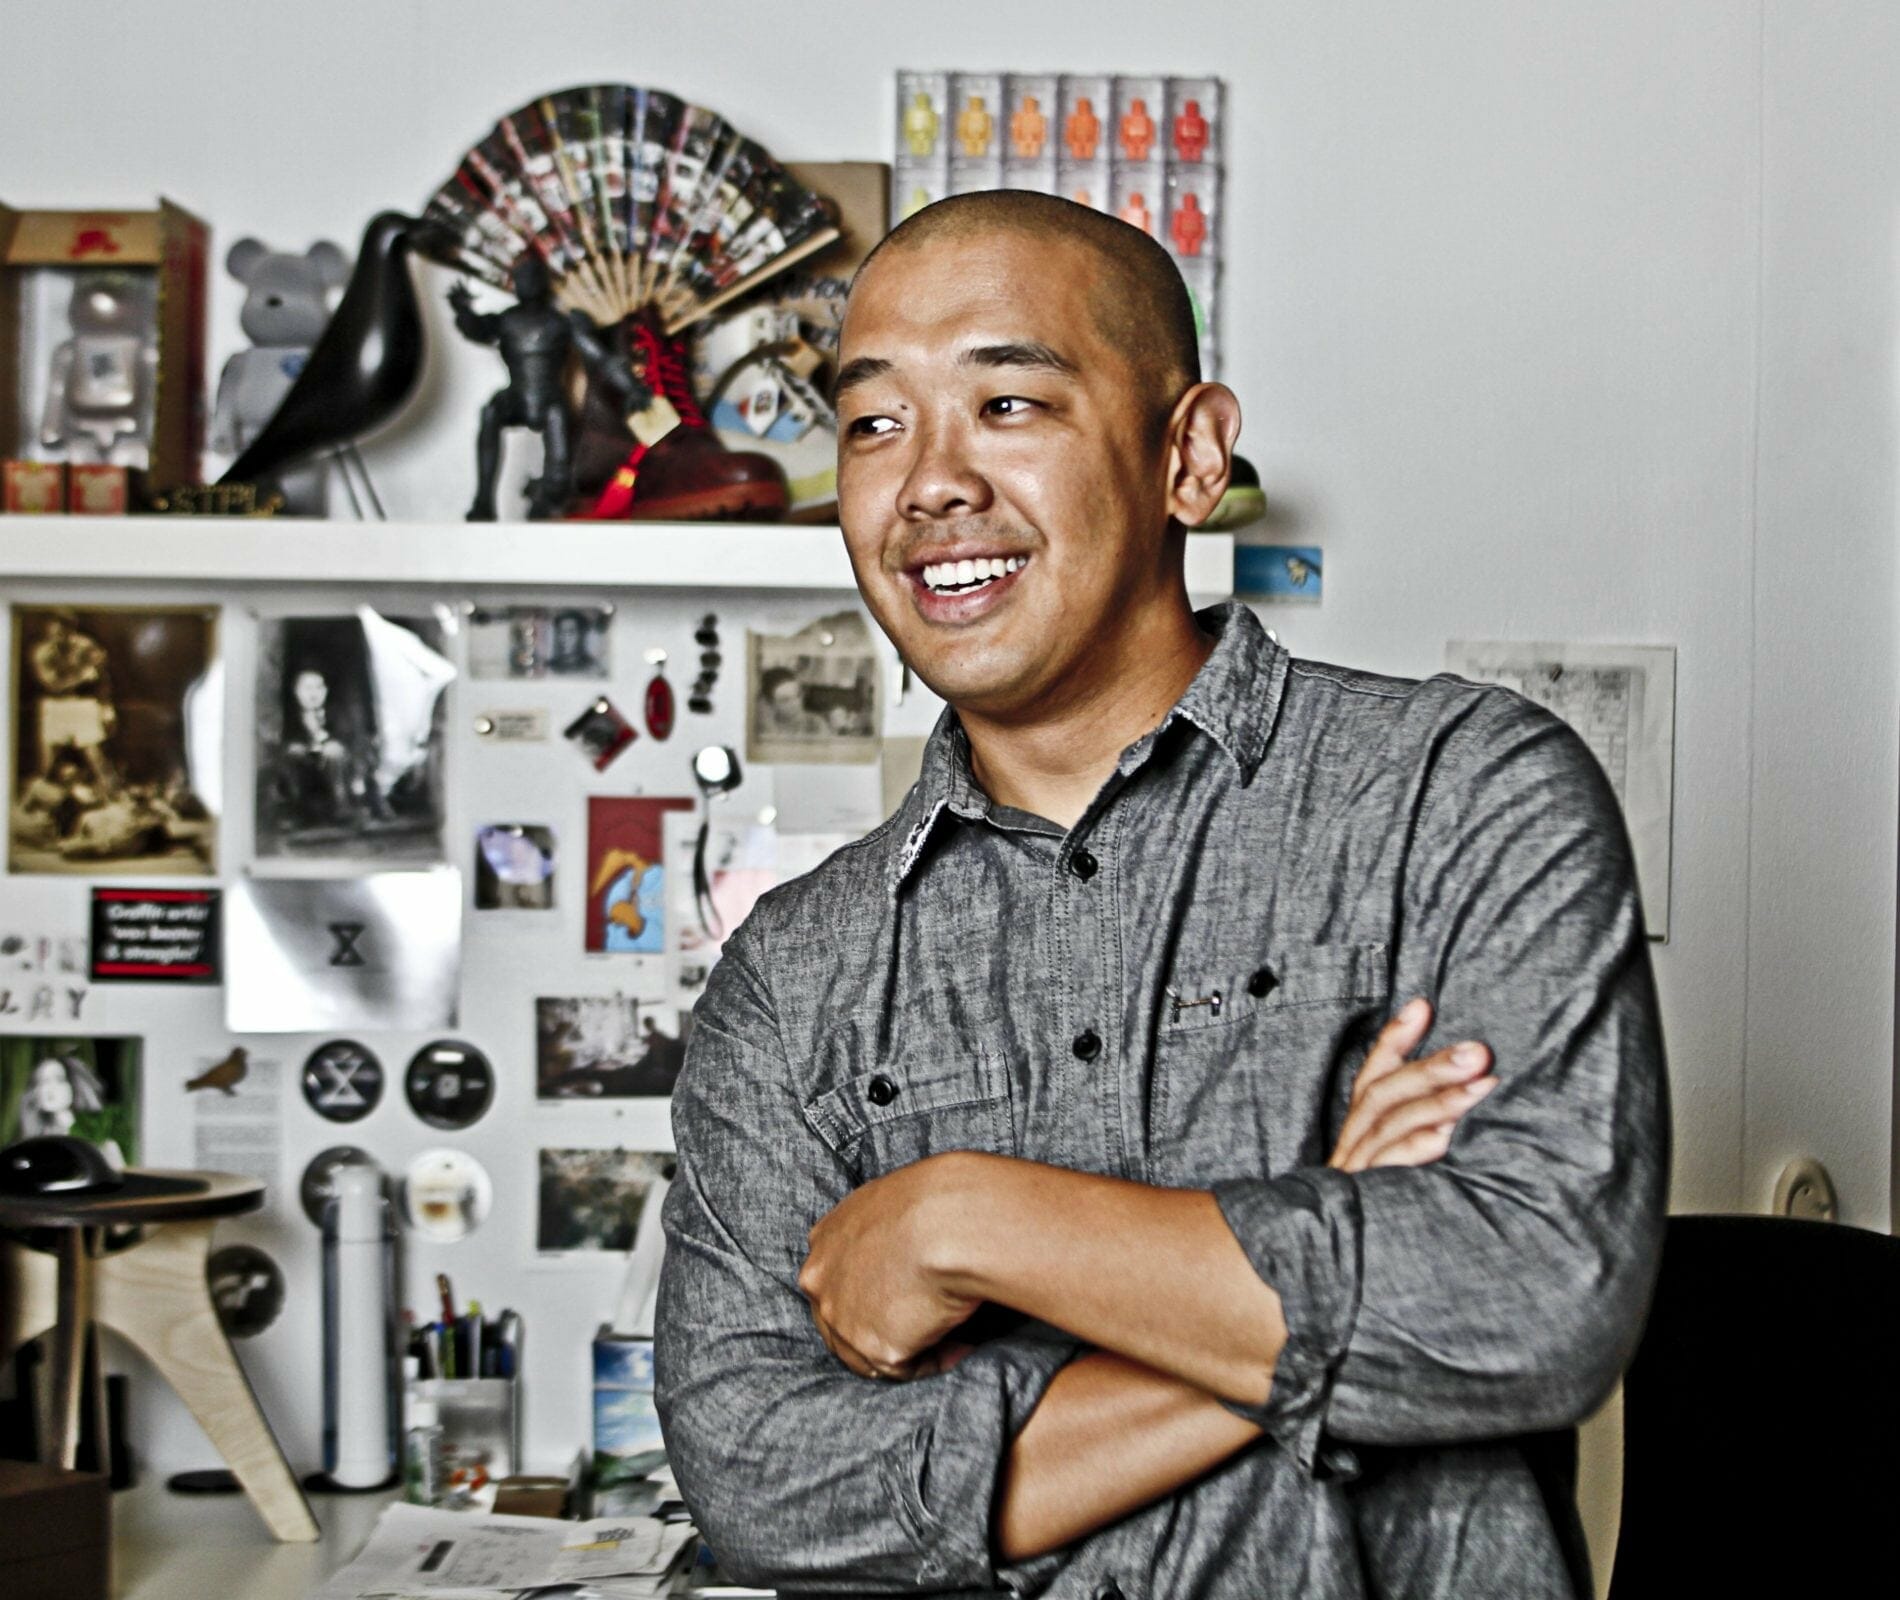 Jeff Staple - Founder and Owner of Staple Design